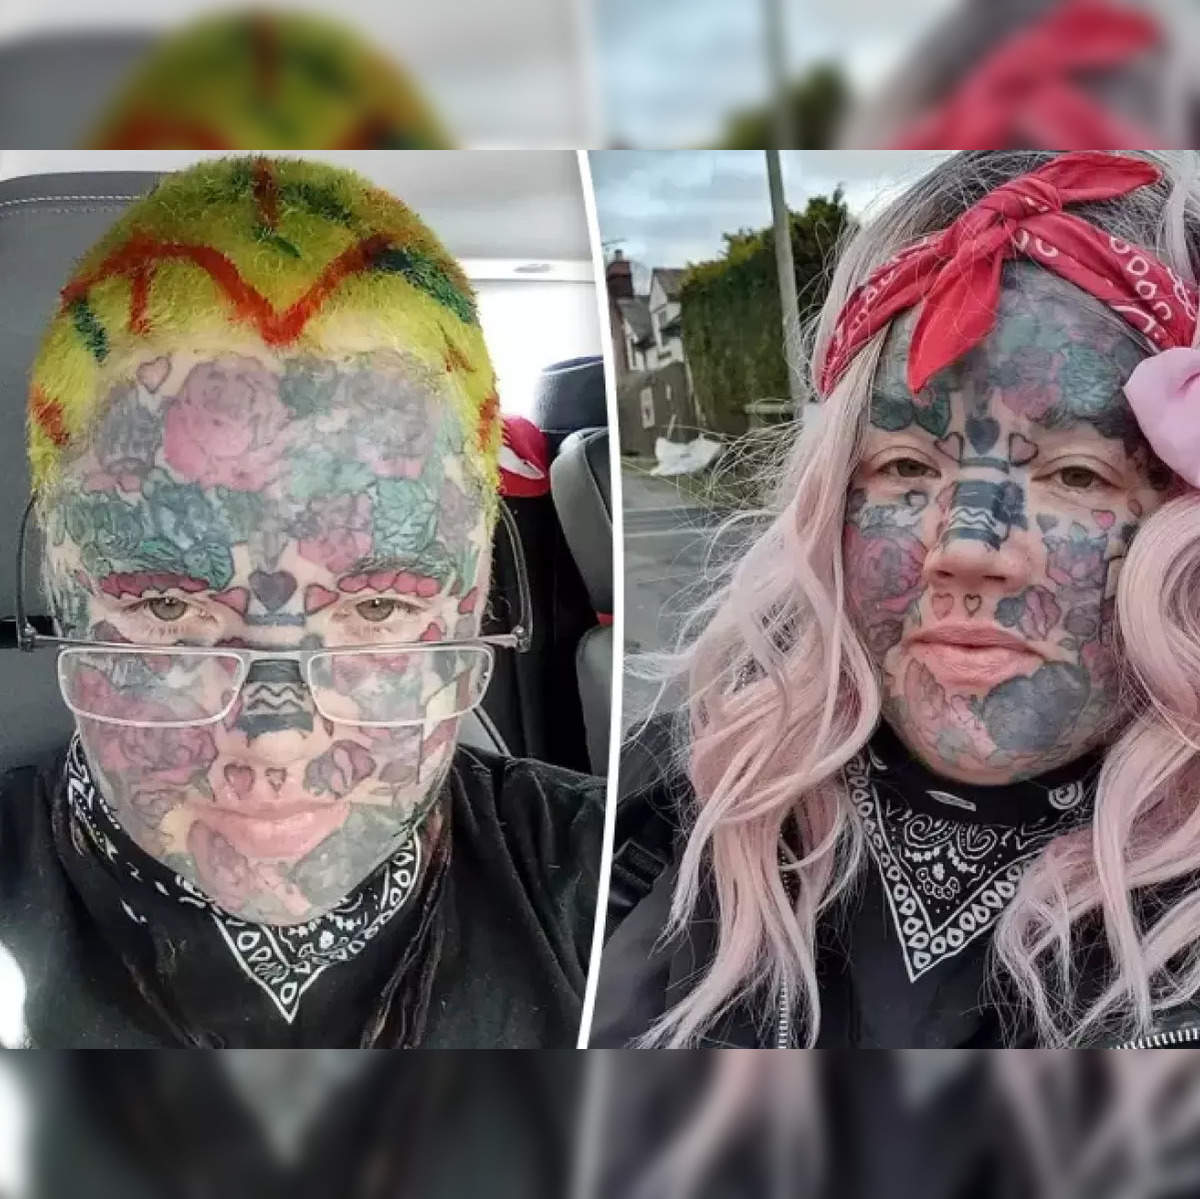 Drunk expat Brit in Taiwan wakes up with face tattoos | Daily Mail Online